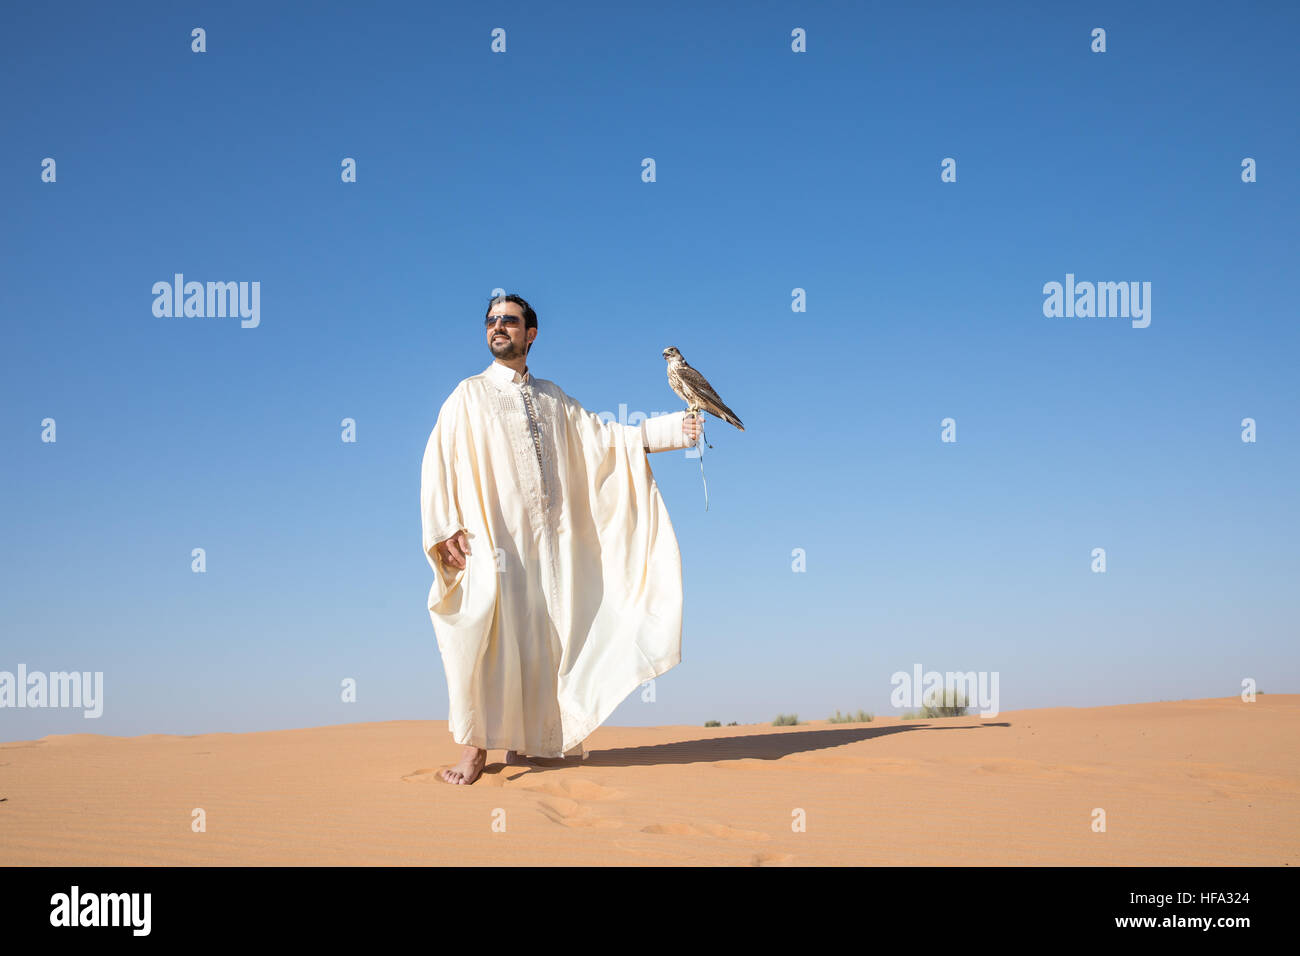 Traditionally dressed Arab man with a saker falcon. Stock Photo